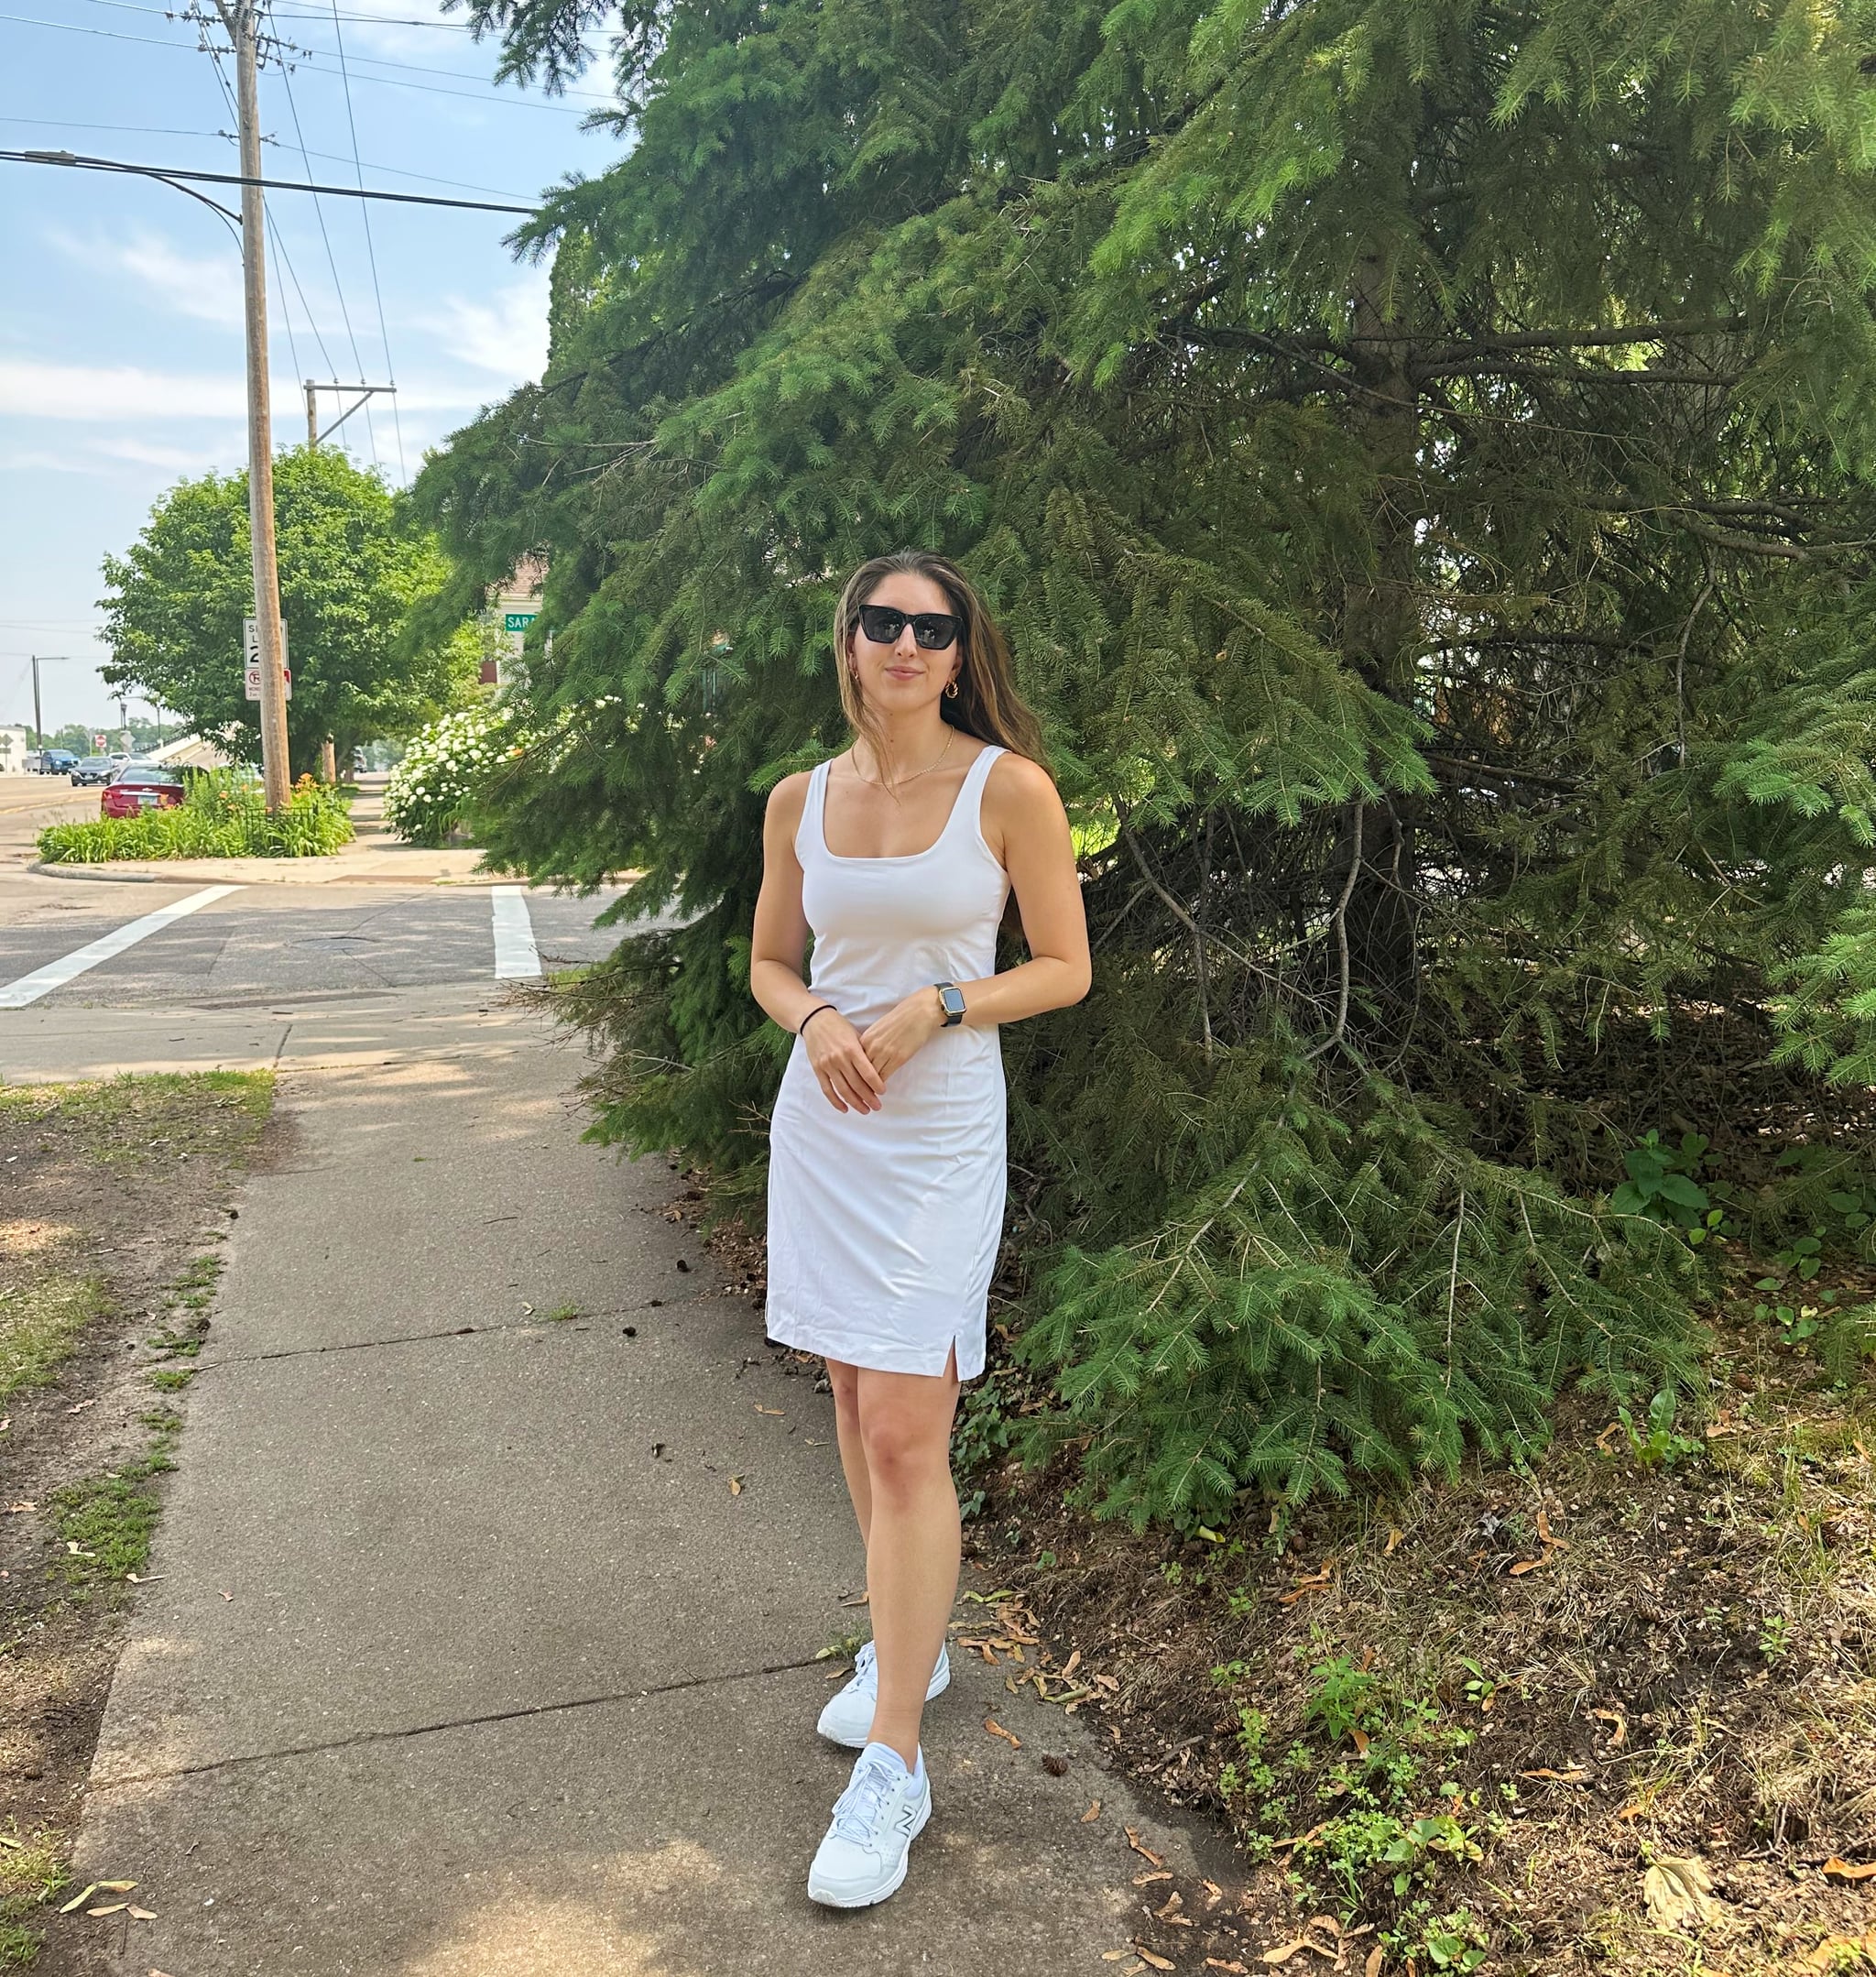 Old Navy PowerSoft Sleeveless Support Dress, Editor Review